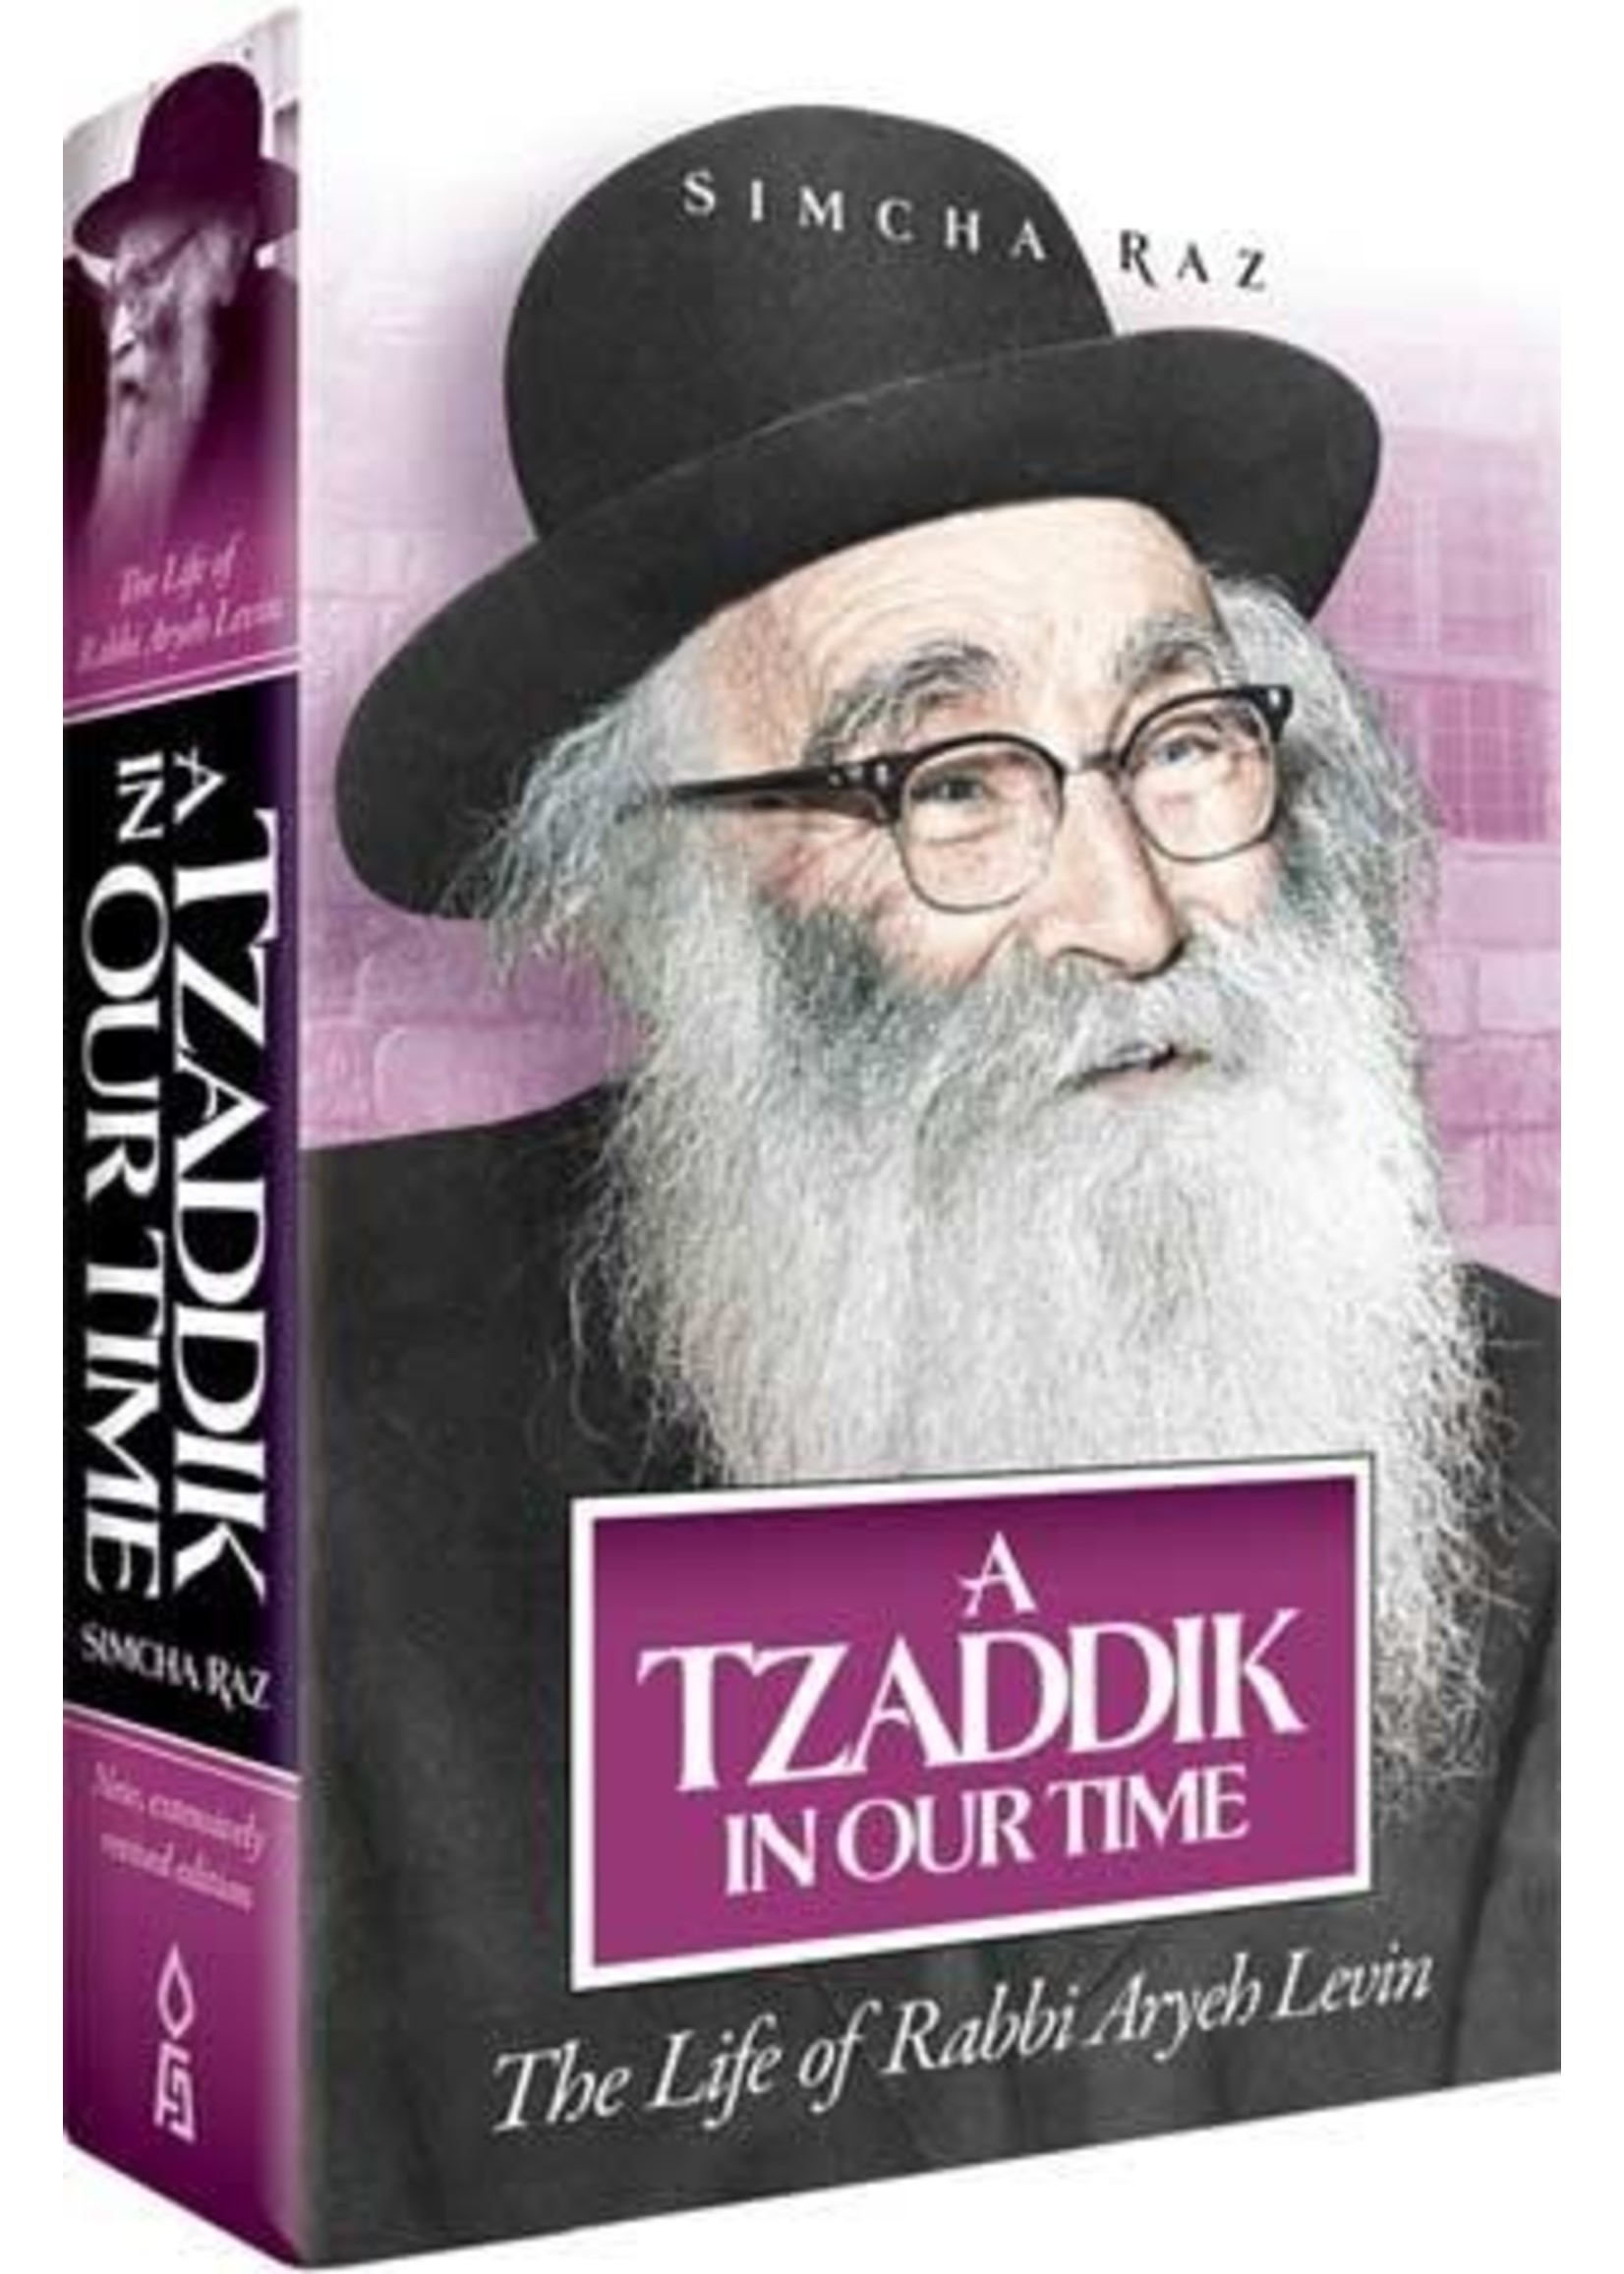 A TZADDIK IN OUR TIME